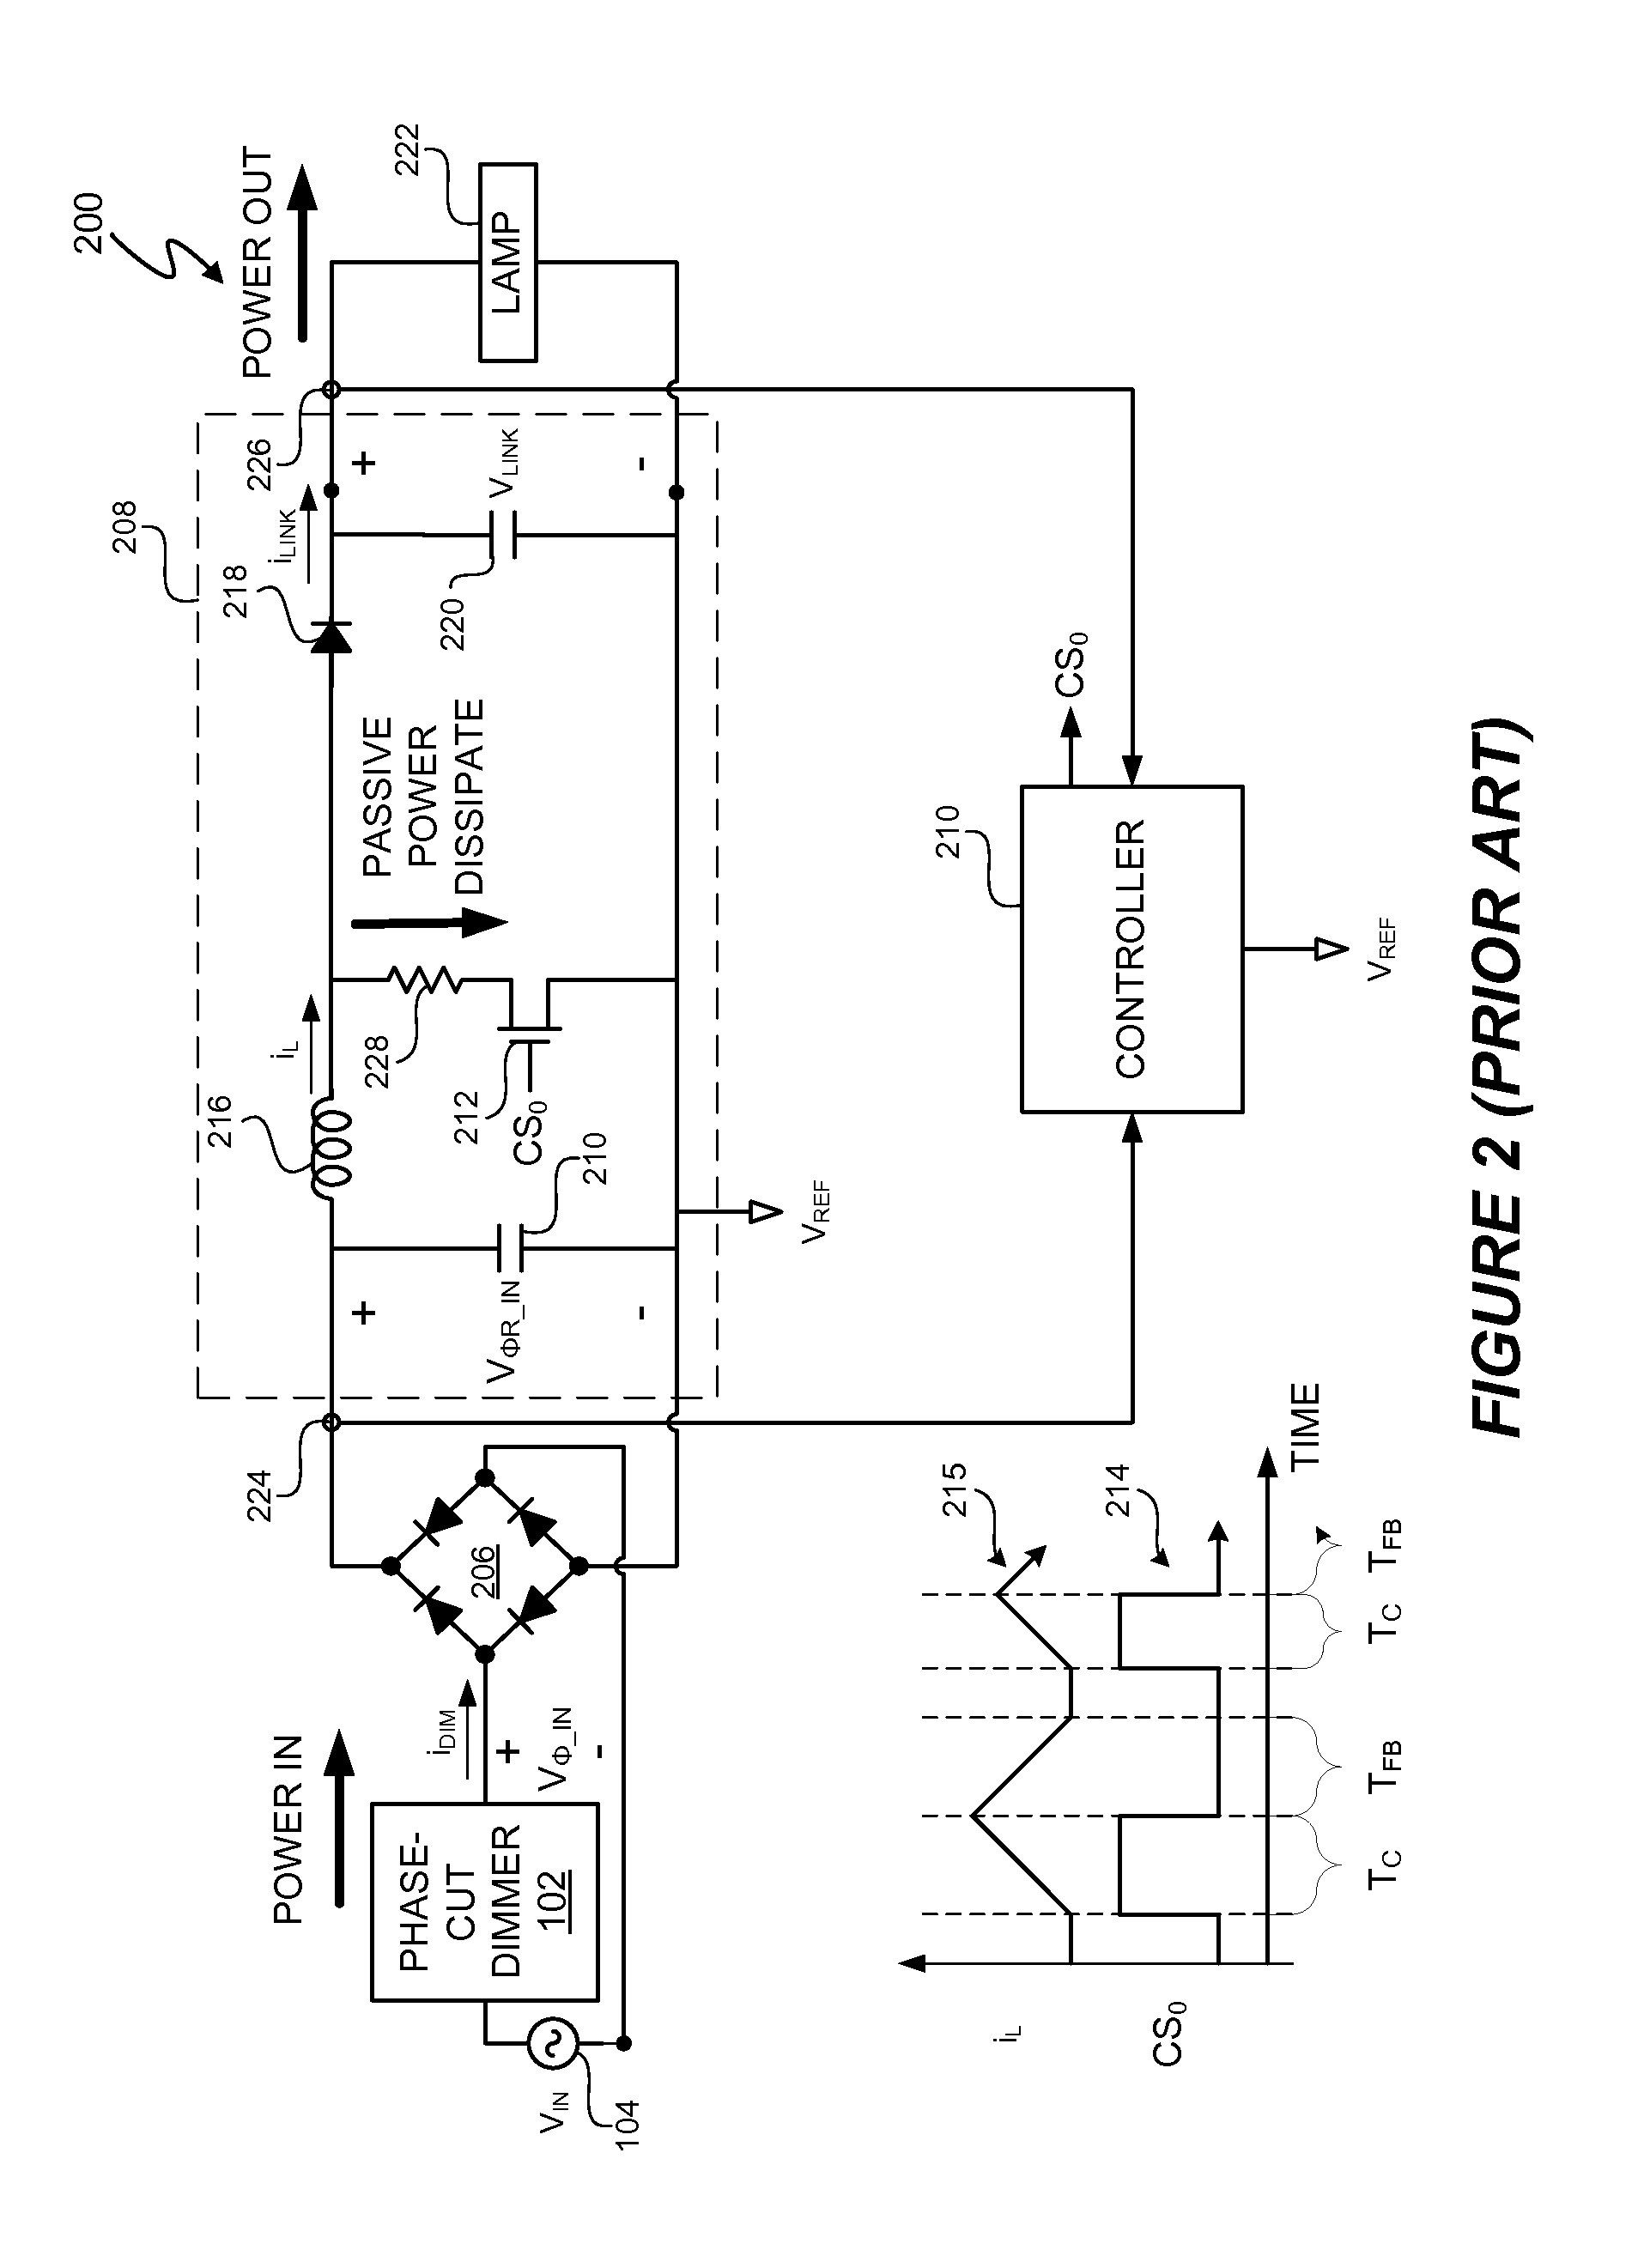 Thermal Management In A Lighting System Using Multiple, Controlled Power Dissipation Circuits